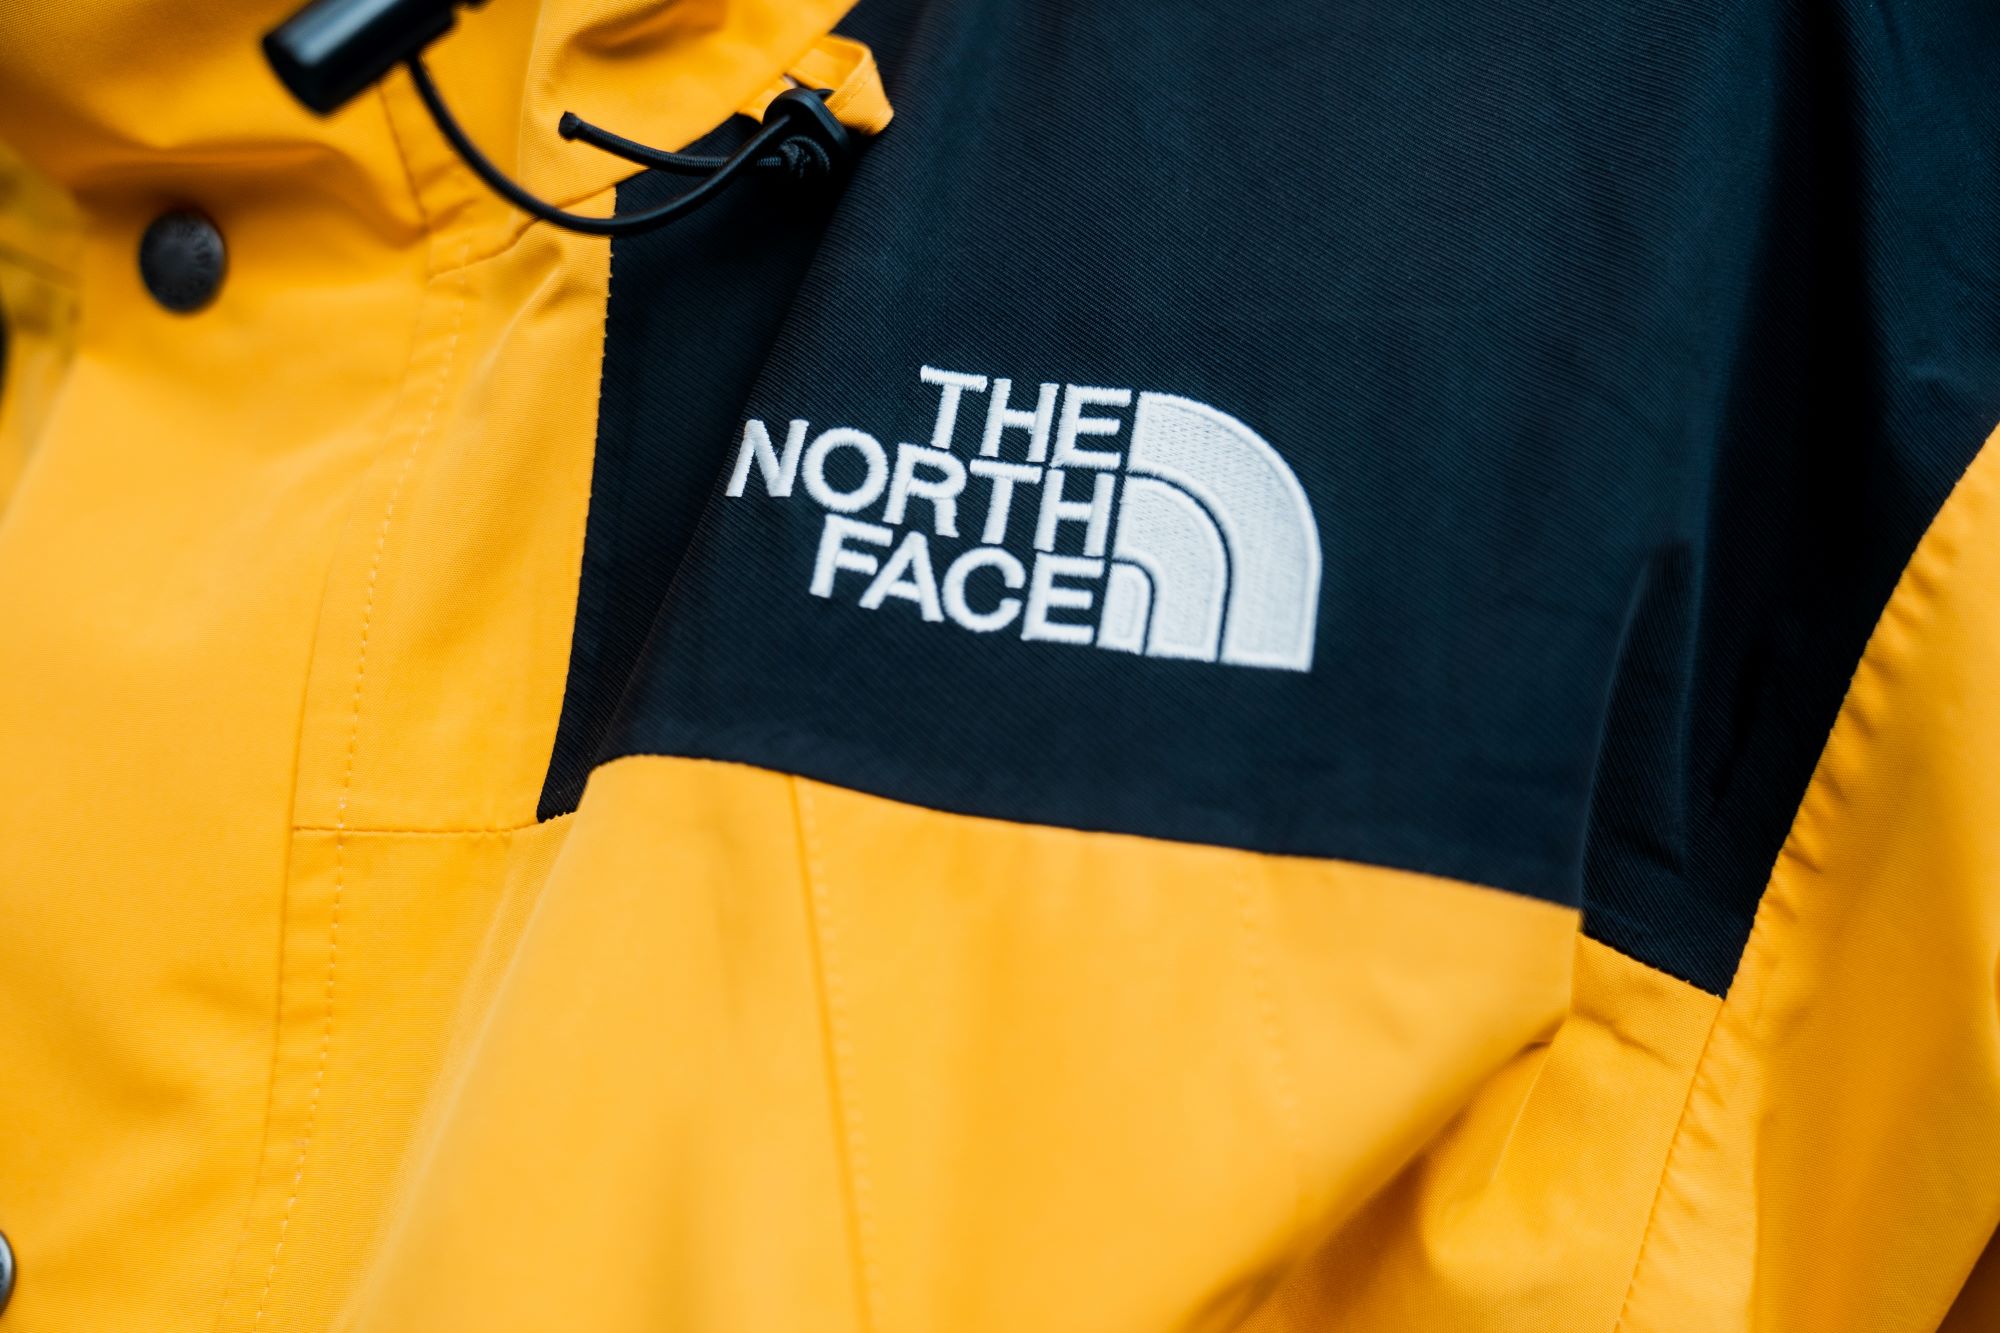 The North Face Recycling Program Benefits